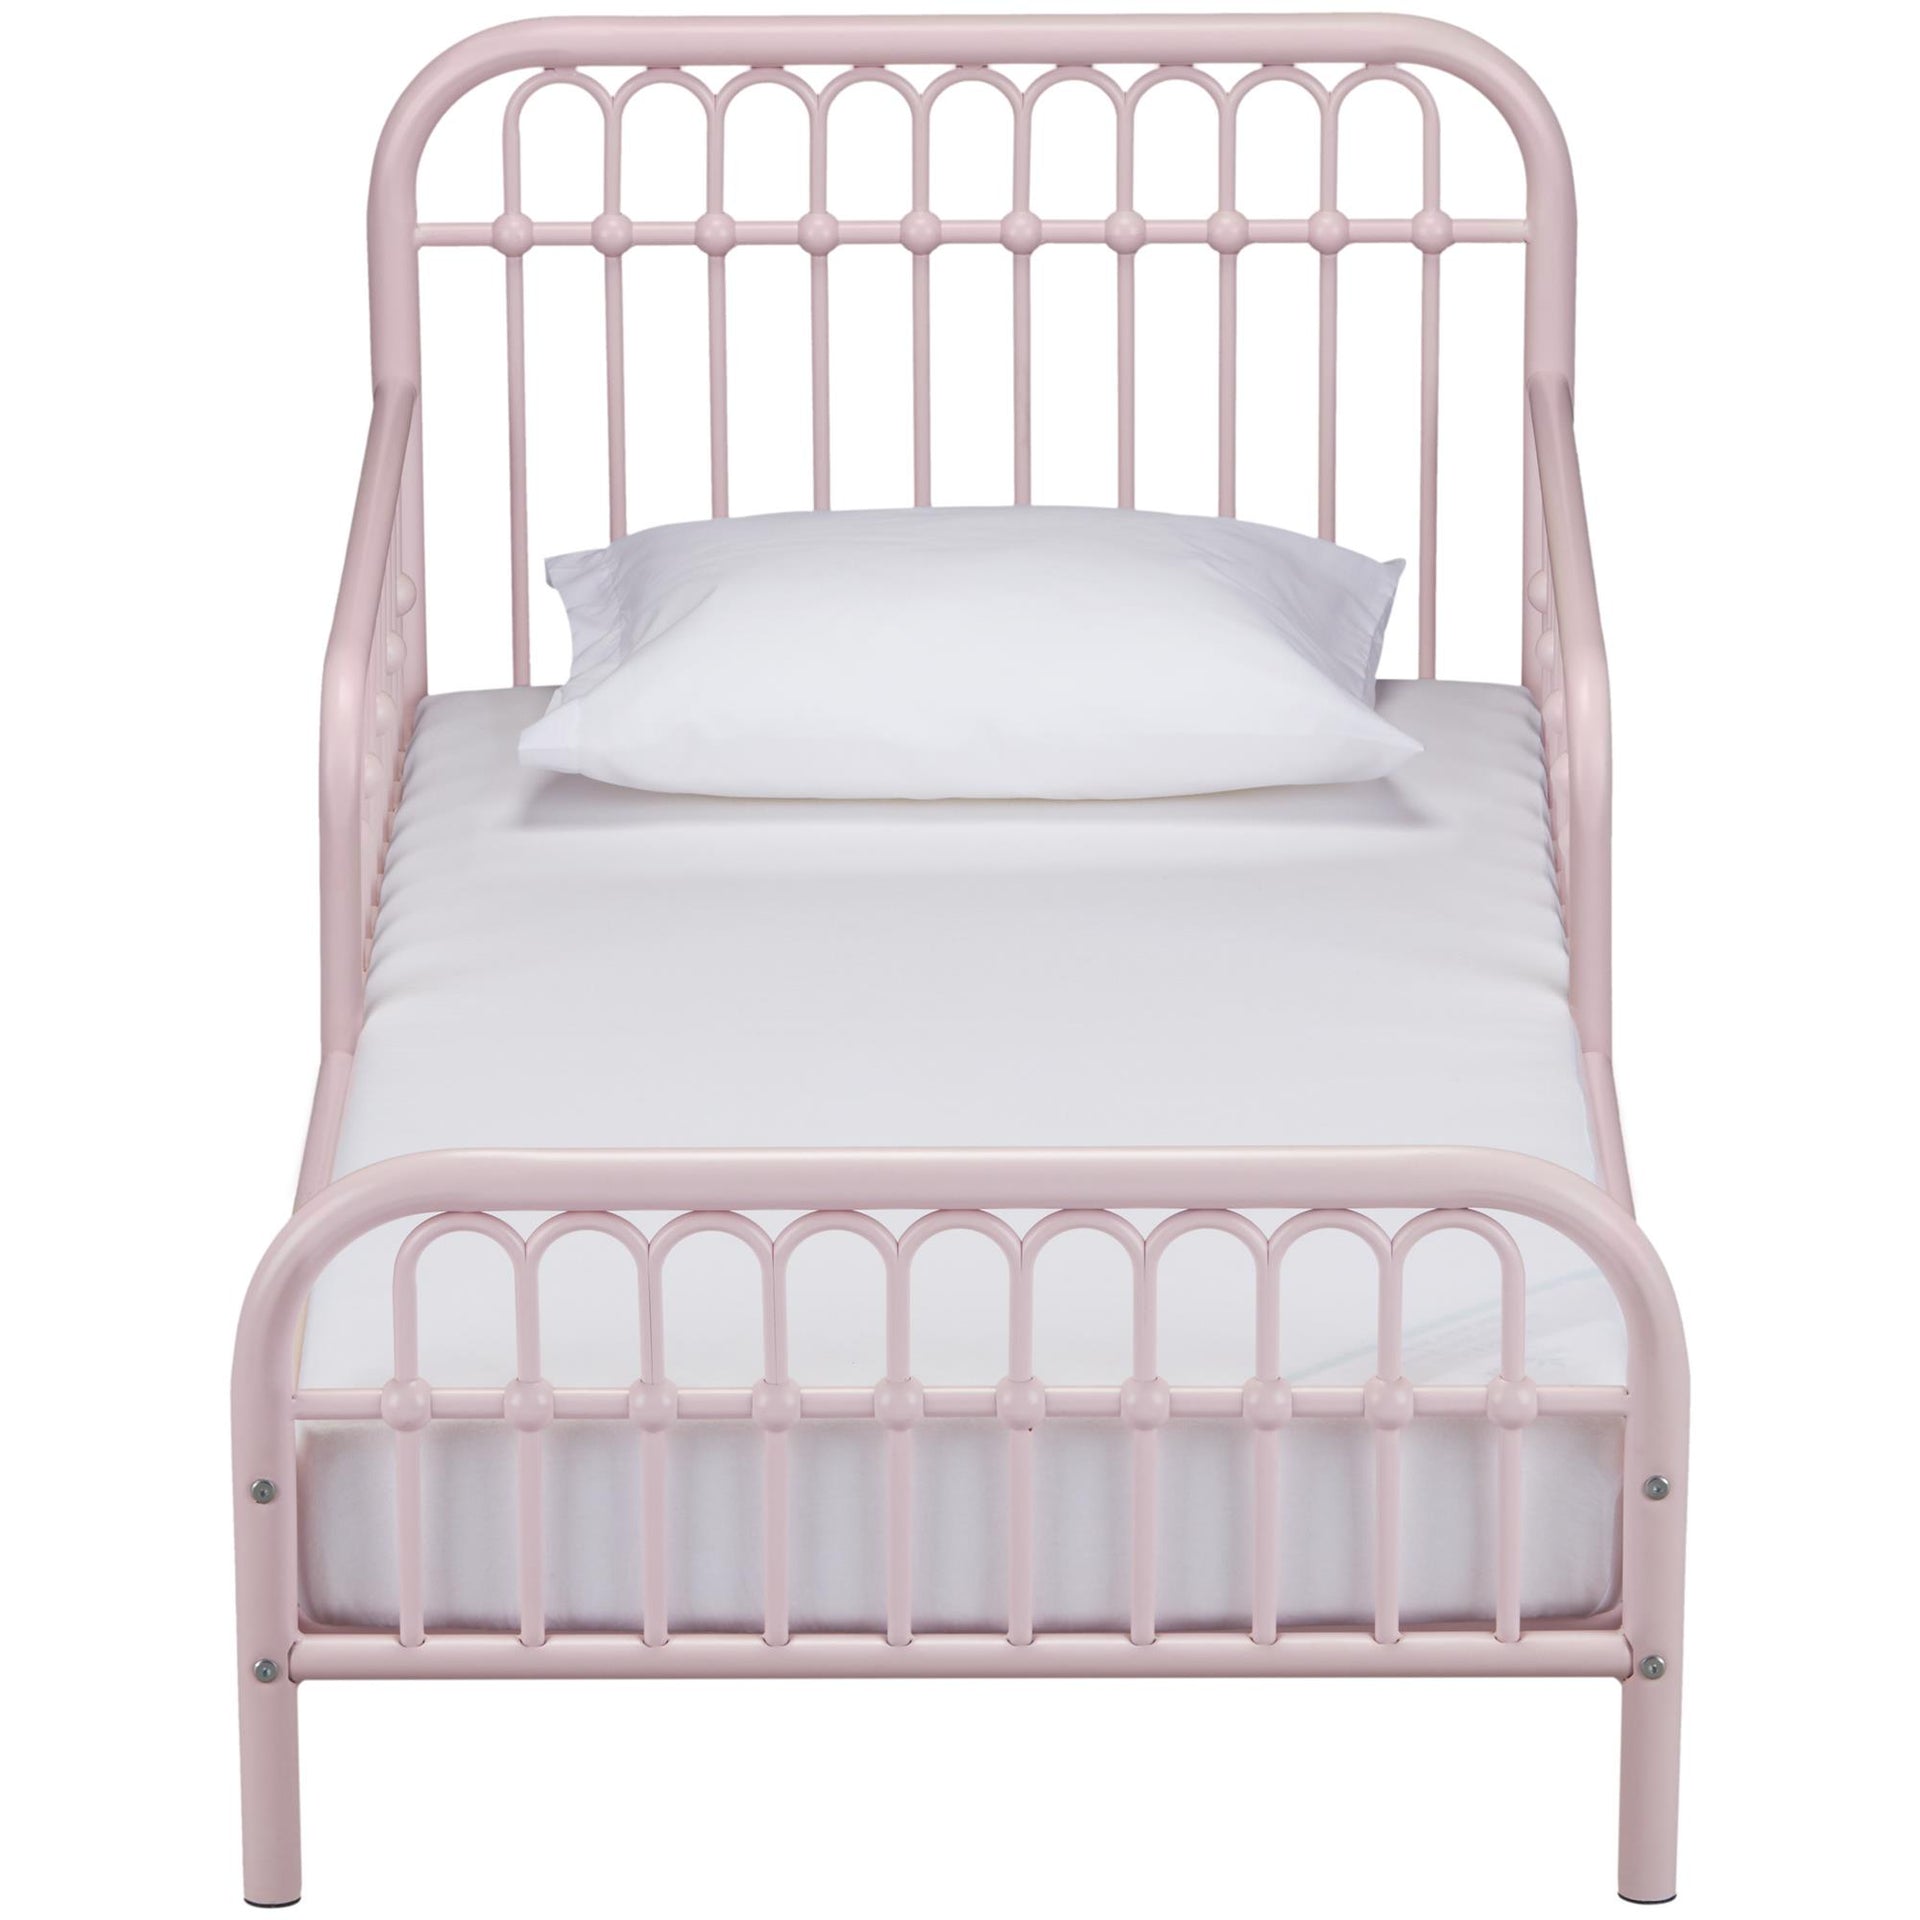 The Willow Iron & Brass Bed  Wrought Iron & Brass Bed Co.